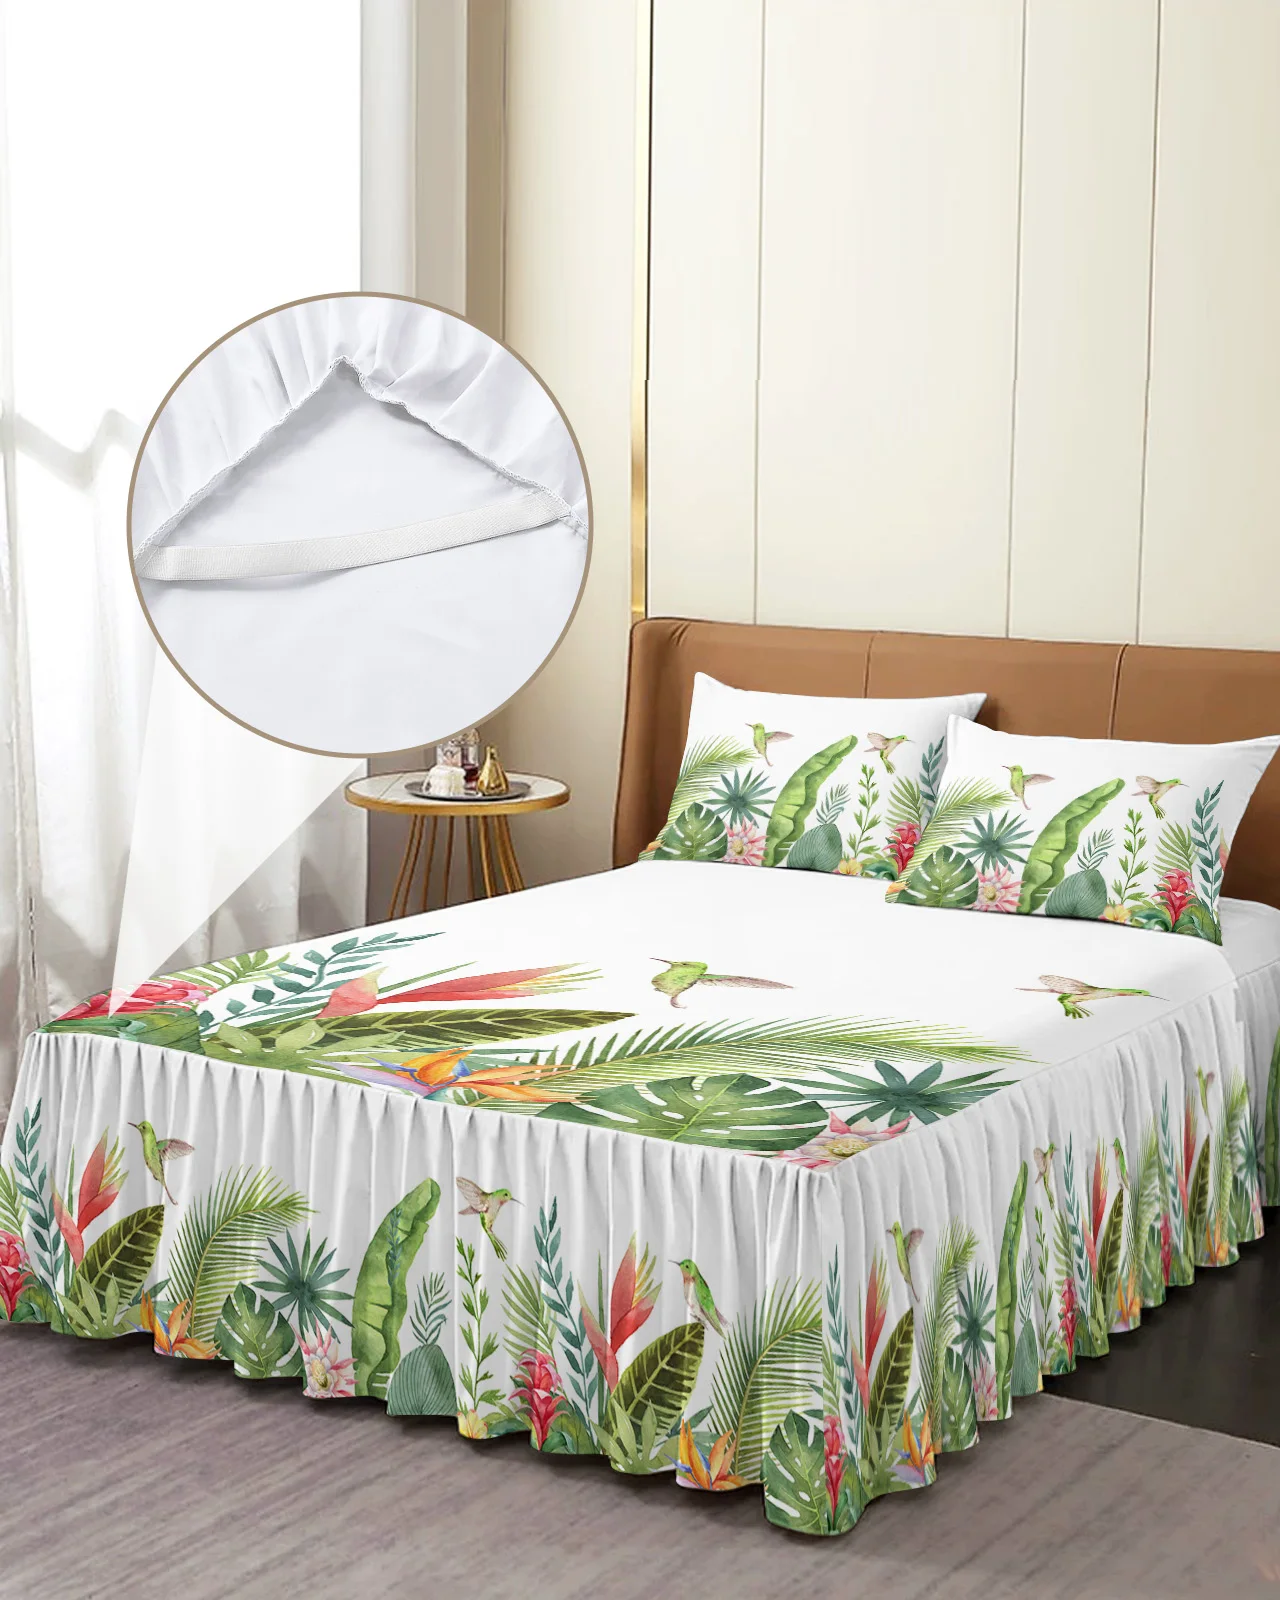 

Ins Style Tropical Plants Palm Leaves Bed Skirt Elastic Fitted Bedspread With Pillowcases Mattress Cover Bedding Set Bed Sheet